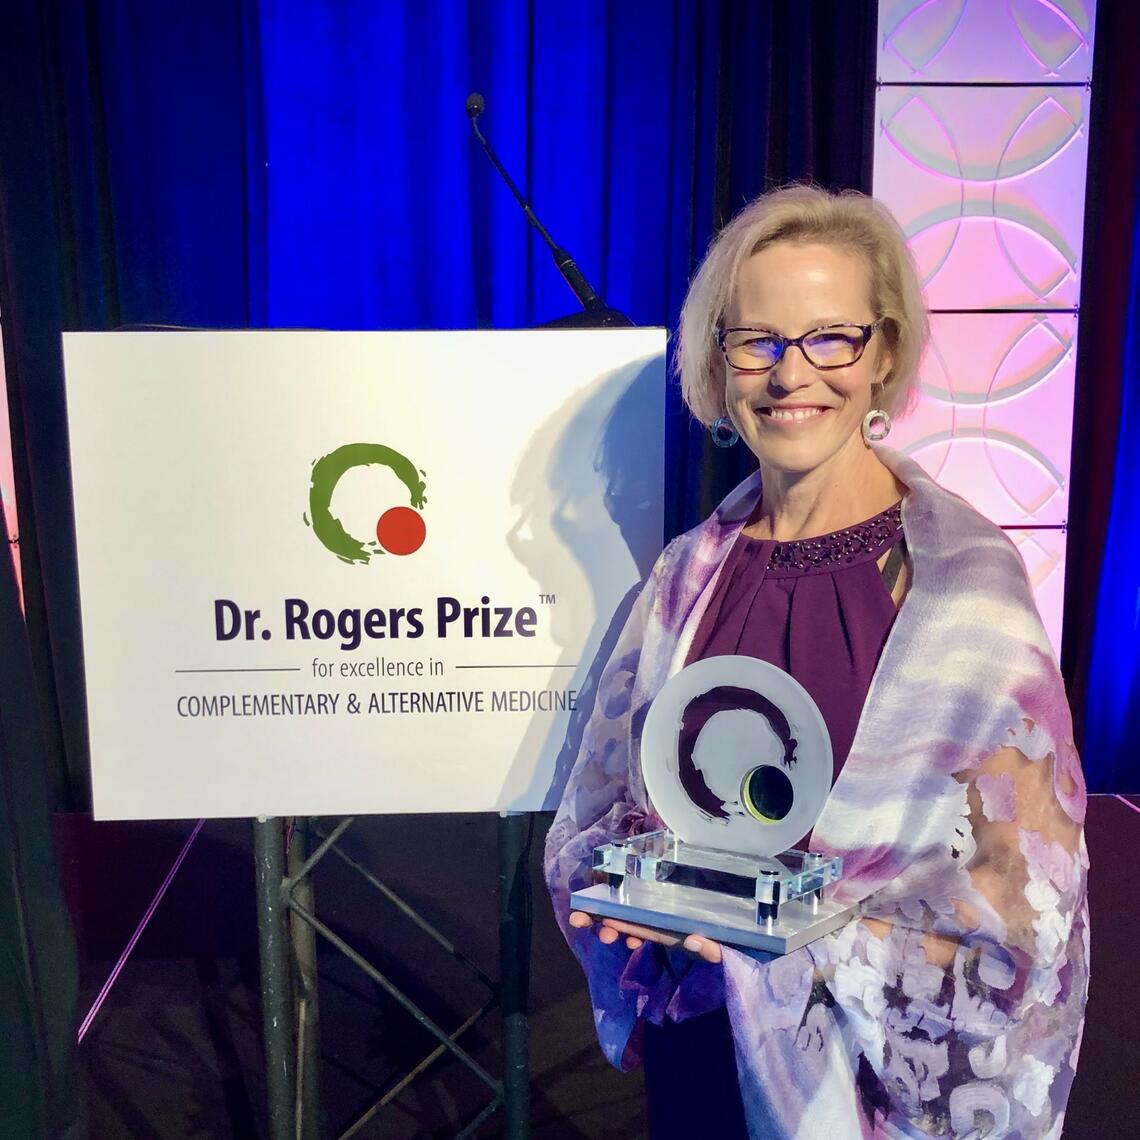 Linda Carlson, Dr. Rogers Prize for Excellence in Complementary and Alternative Medicine